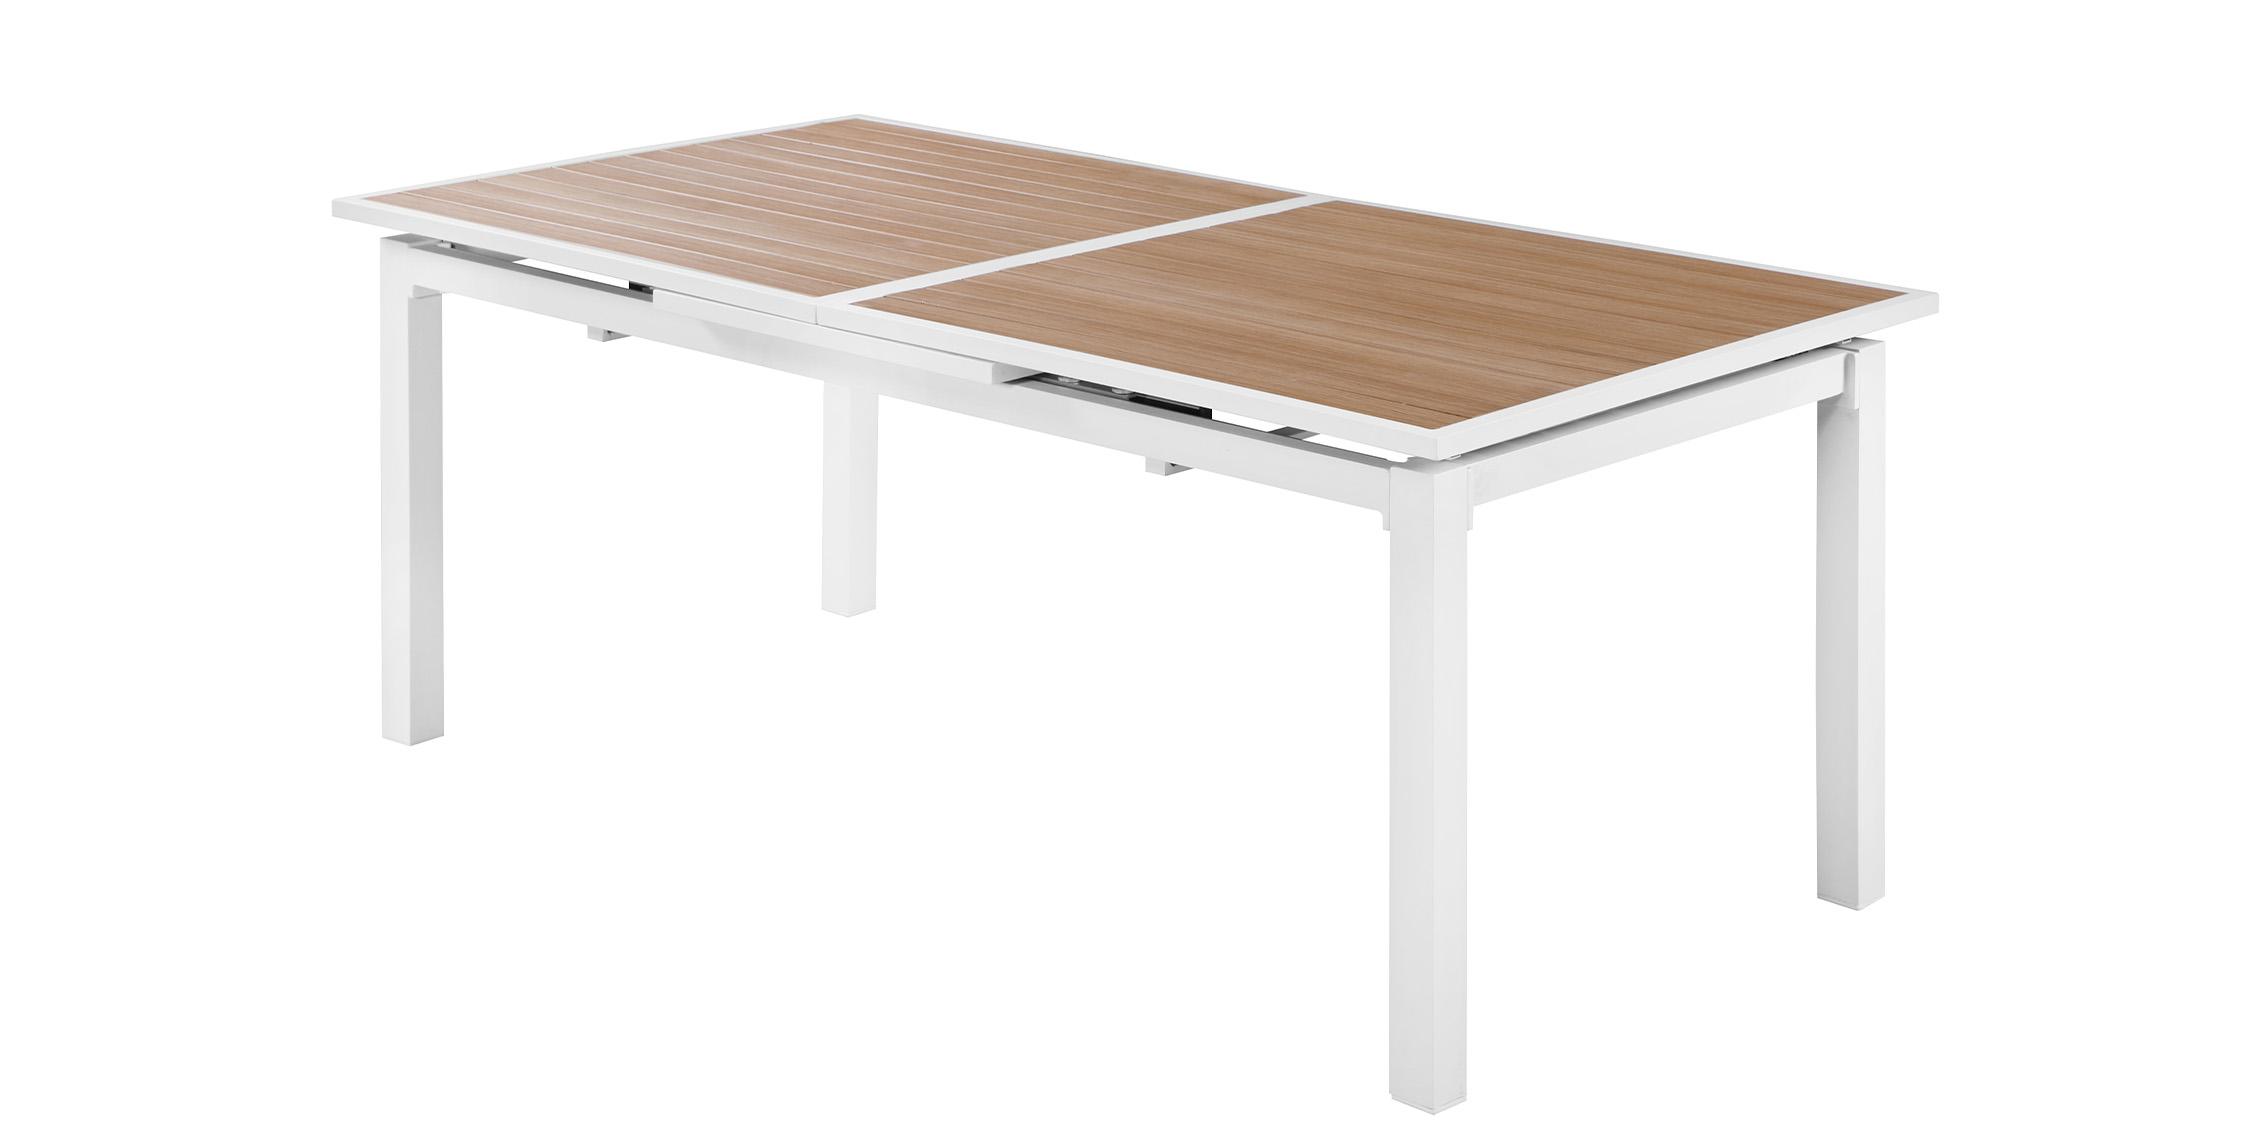 Contemporary Patio Dining Table NIZUC 365-T 365-T in White, Brown 